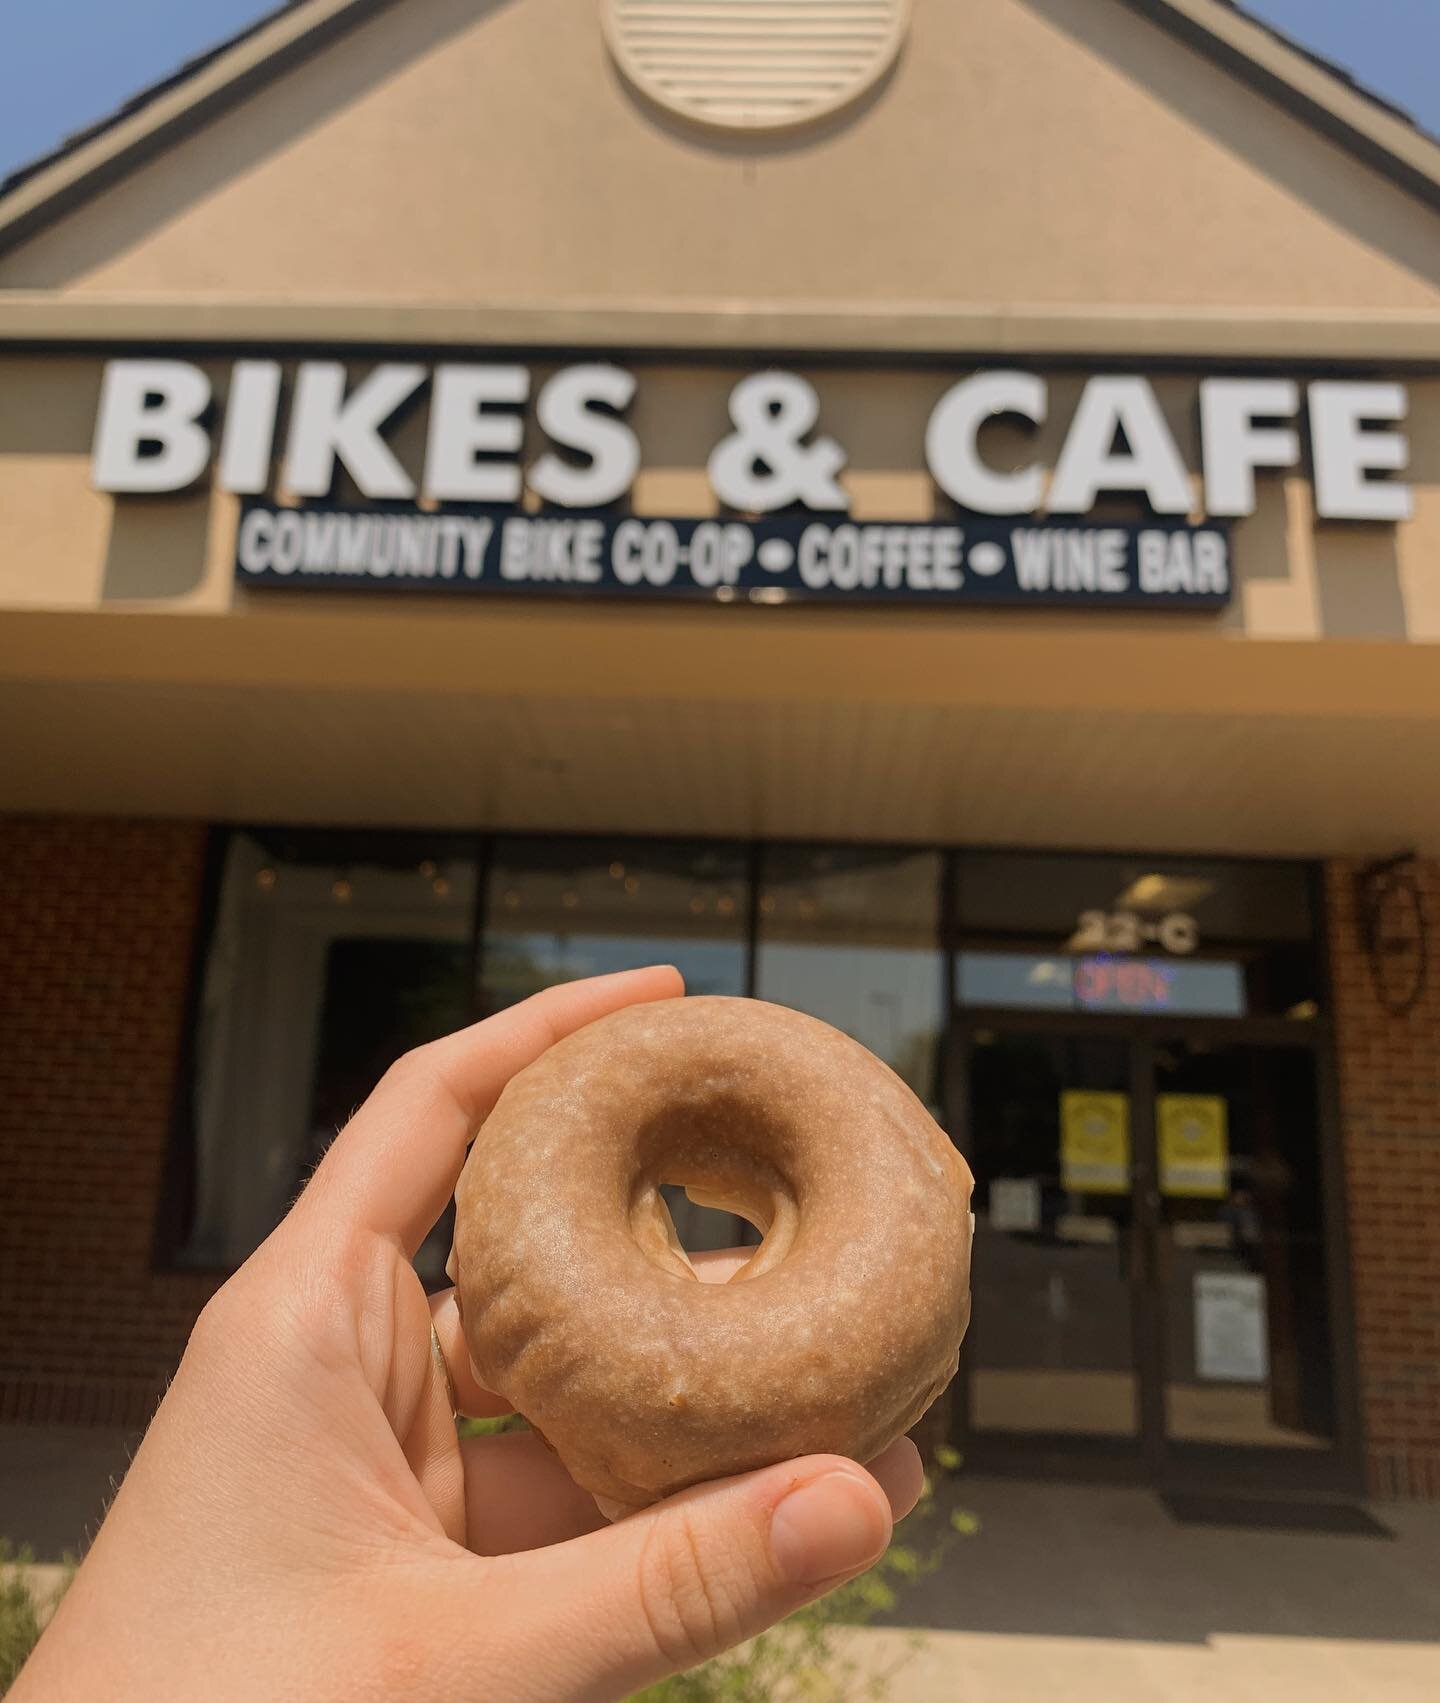 Have you tried our gluten free donuts yet?!😋😋 Get out of the heat and take a break in our shop! We&rsquo;re open till 5pm
&bull;
&bull;
&bull;
#glutenfree #maverickbikesandcafe #leesburgva #smallbusiness #donuts